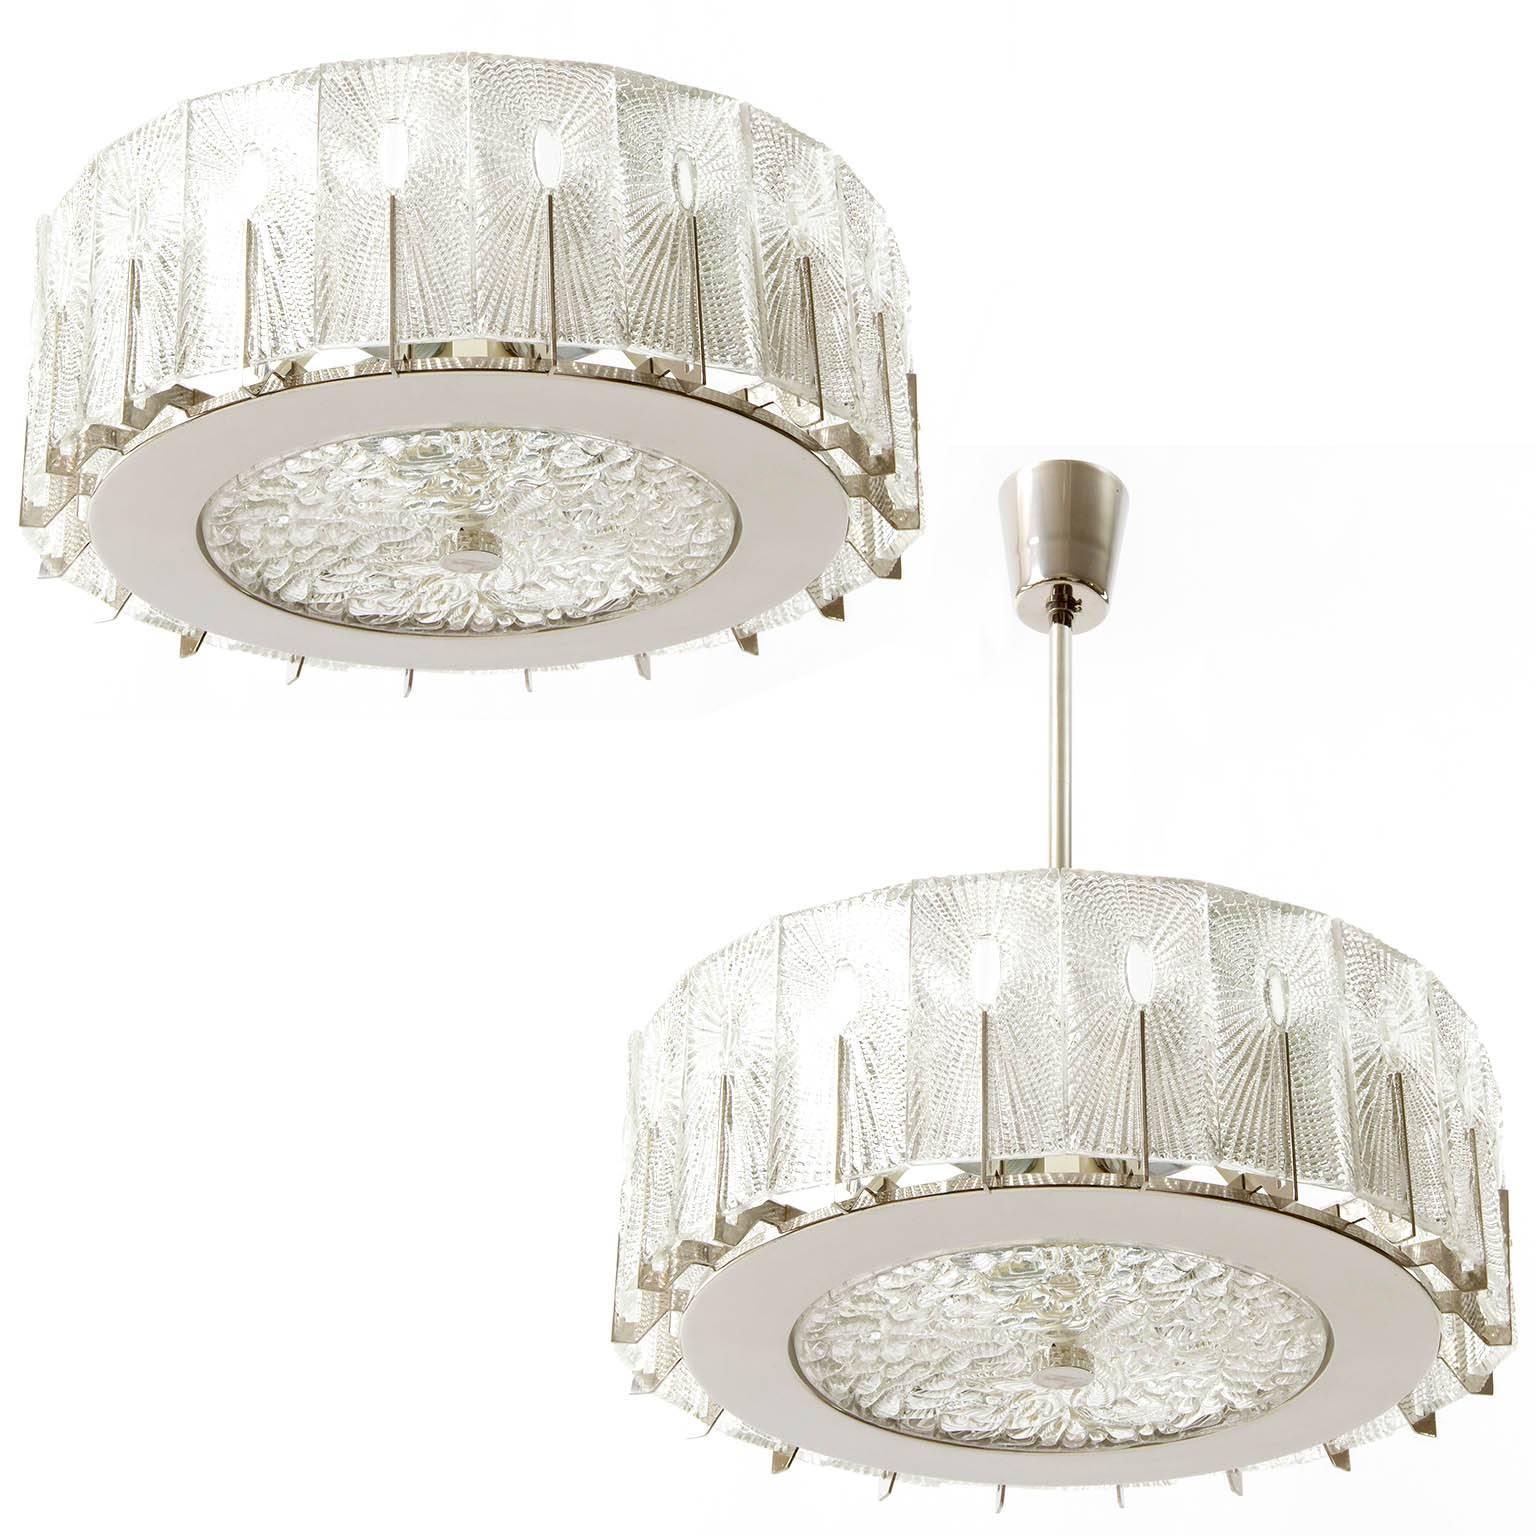 Pair of Chandeliers or Flush Mount Lights by Rupert Nikoll, Glass Nickel, 1950s